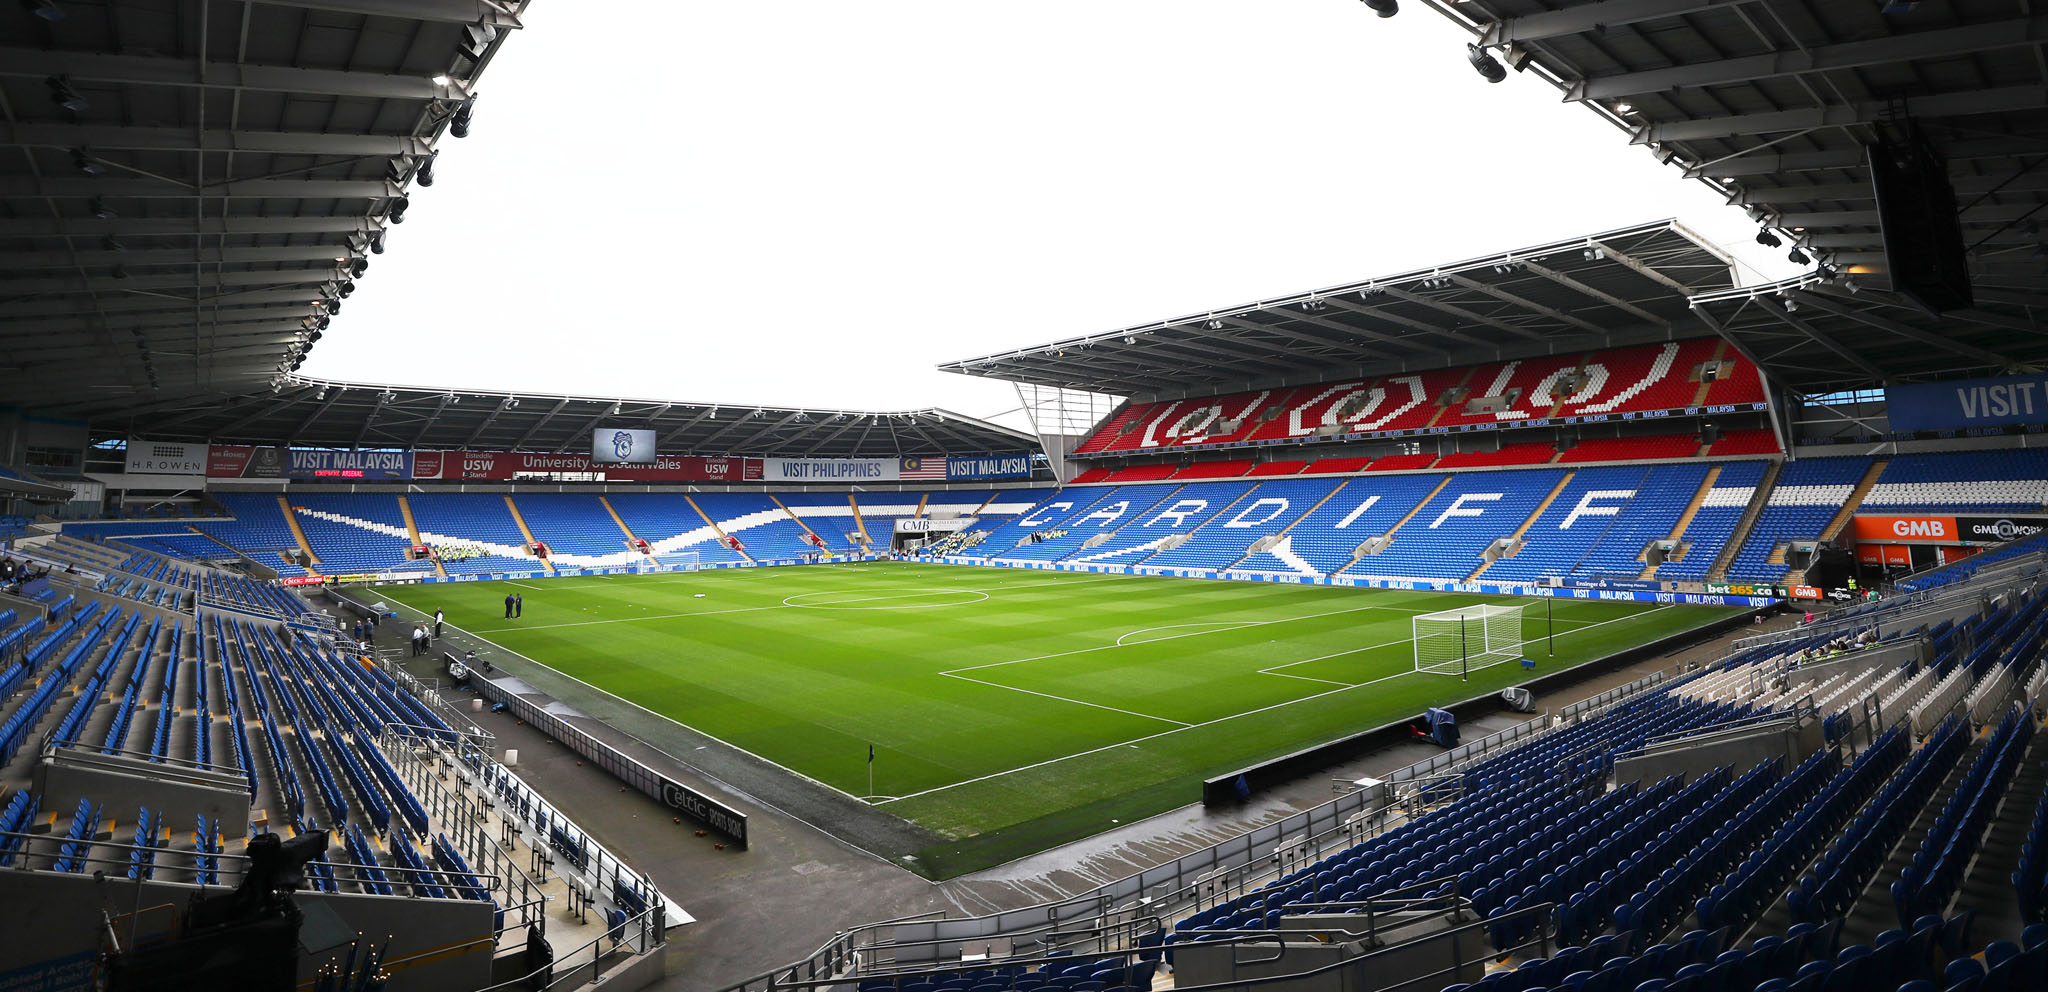 Cardiff City Stadium Tour - Review With Pictures - Only By Land